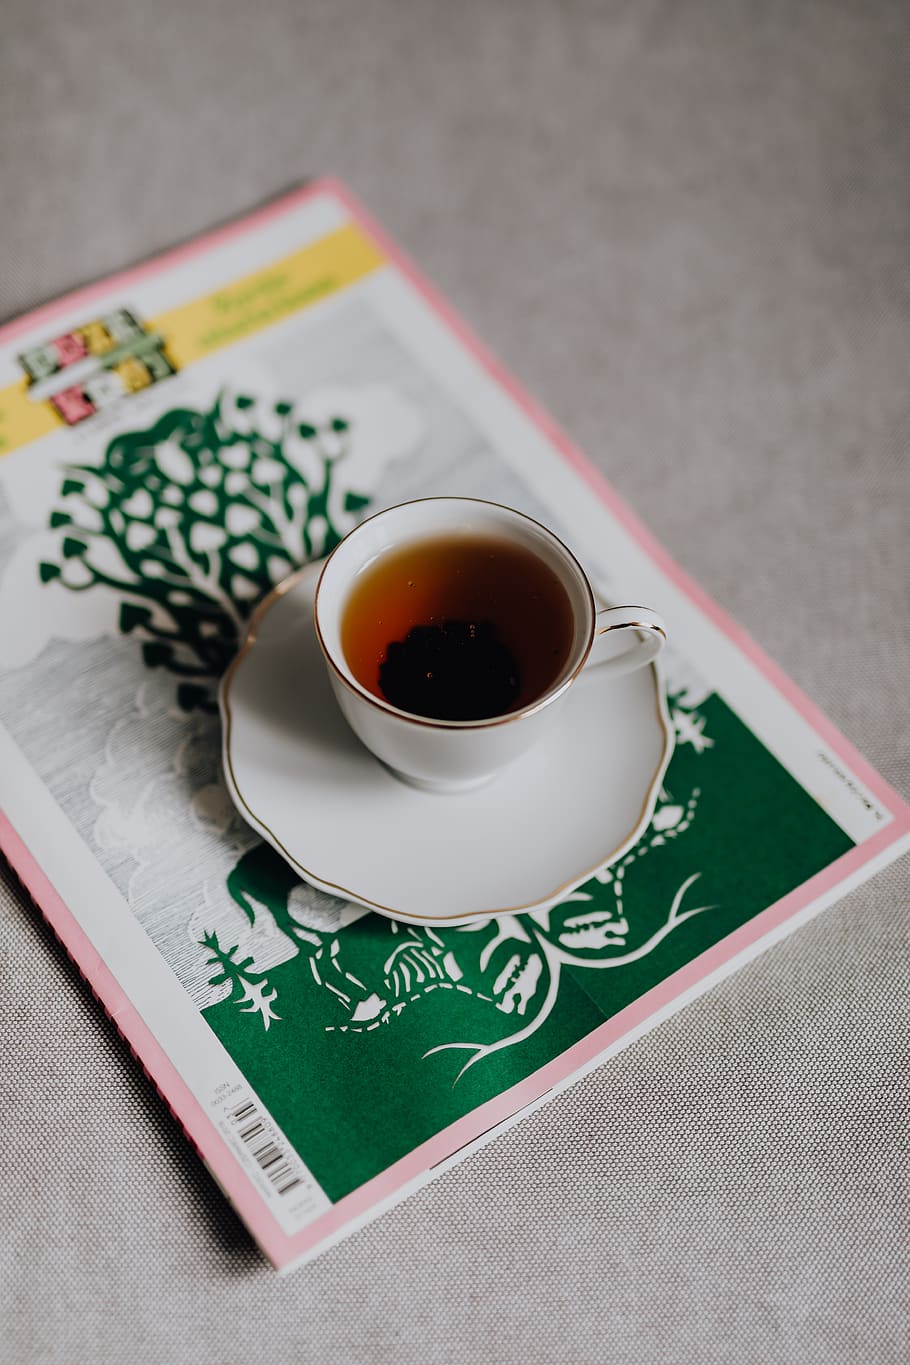 tea, porcelain, china, newspaper, reading, morning, Cup, food and drink, drink, table